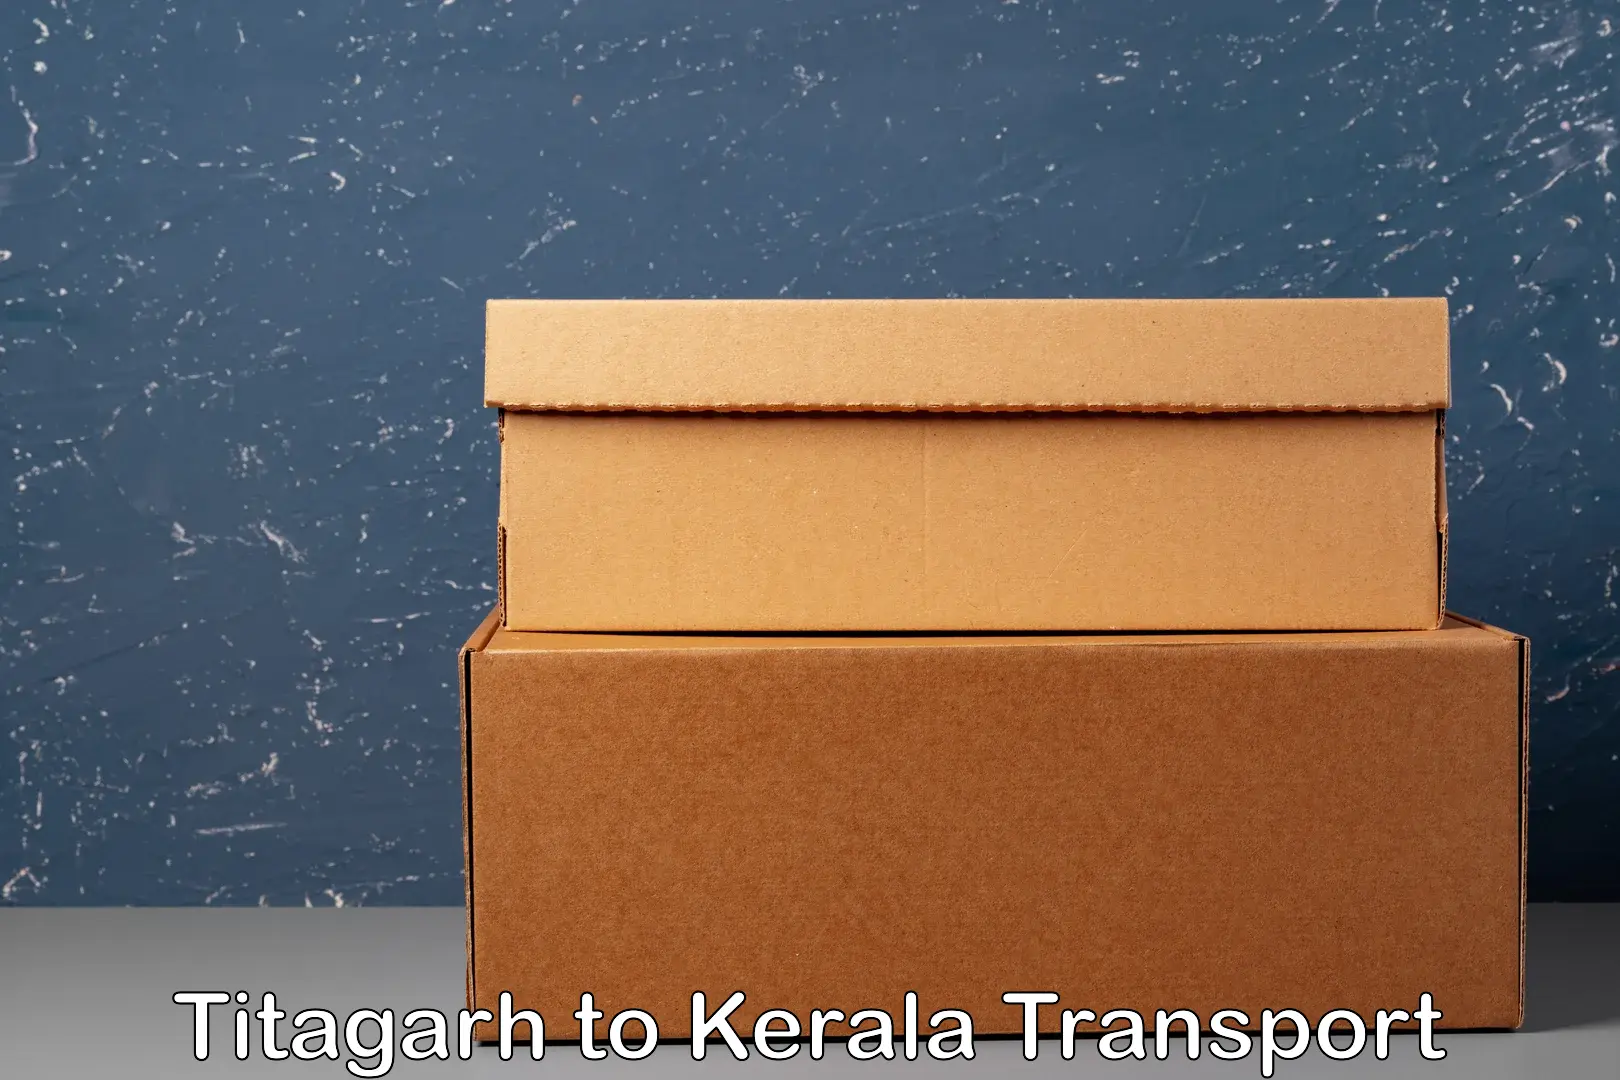 Road transport online services Titagarh to Mahe